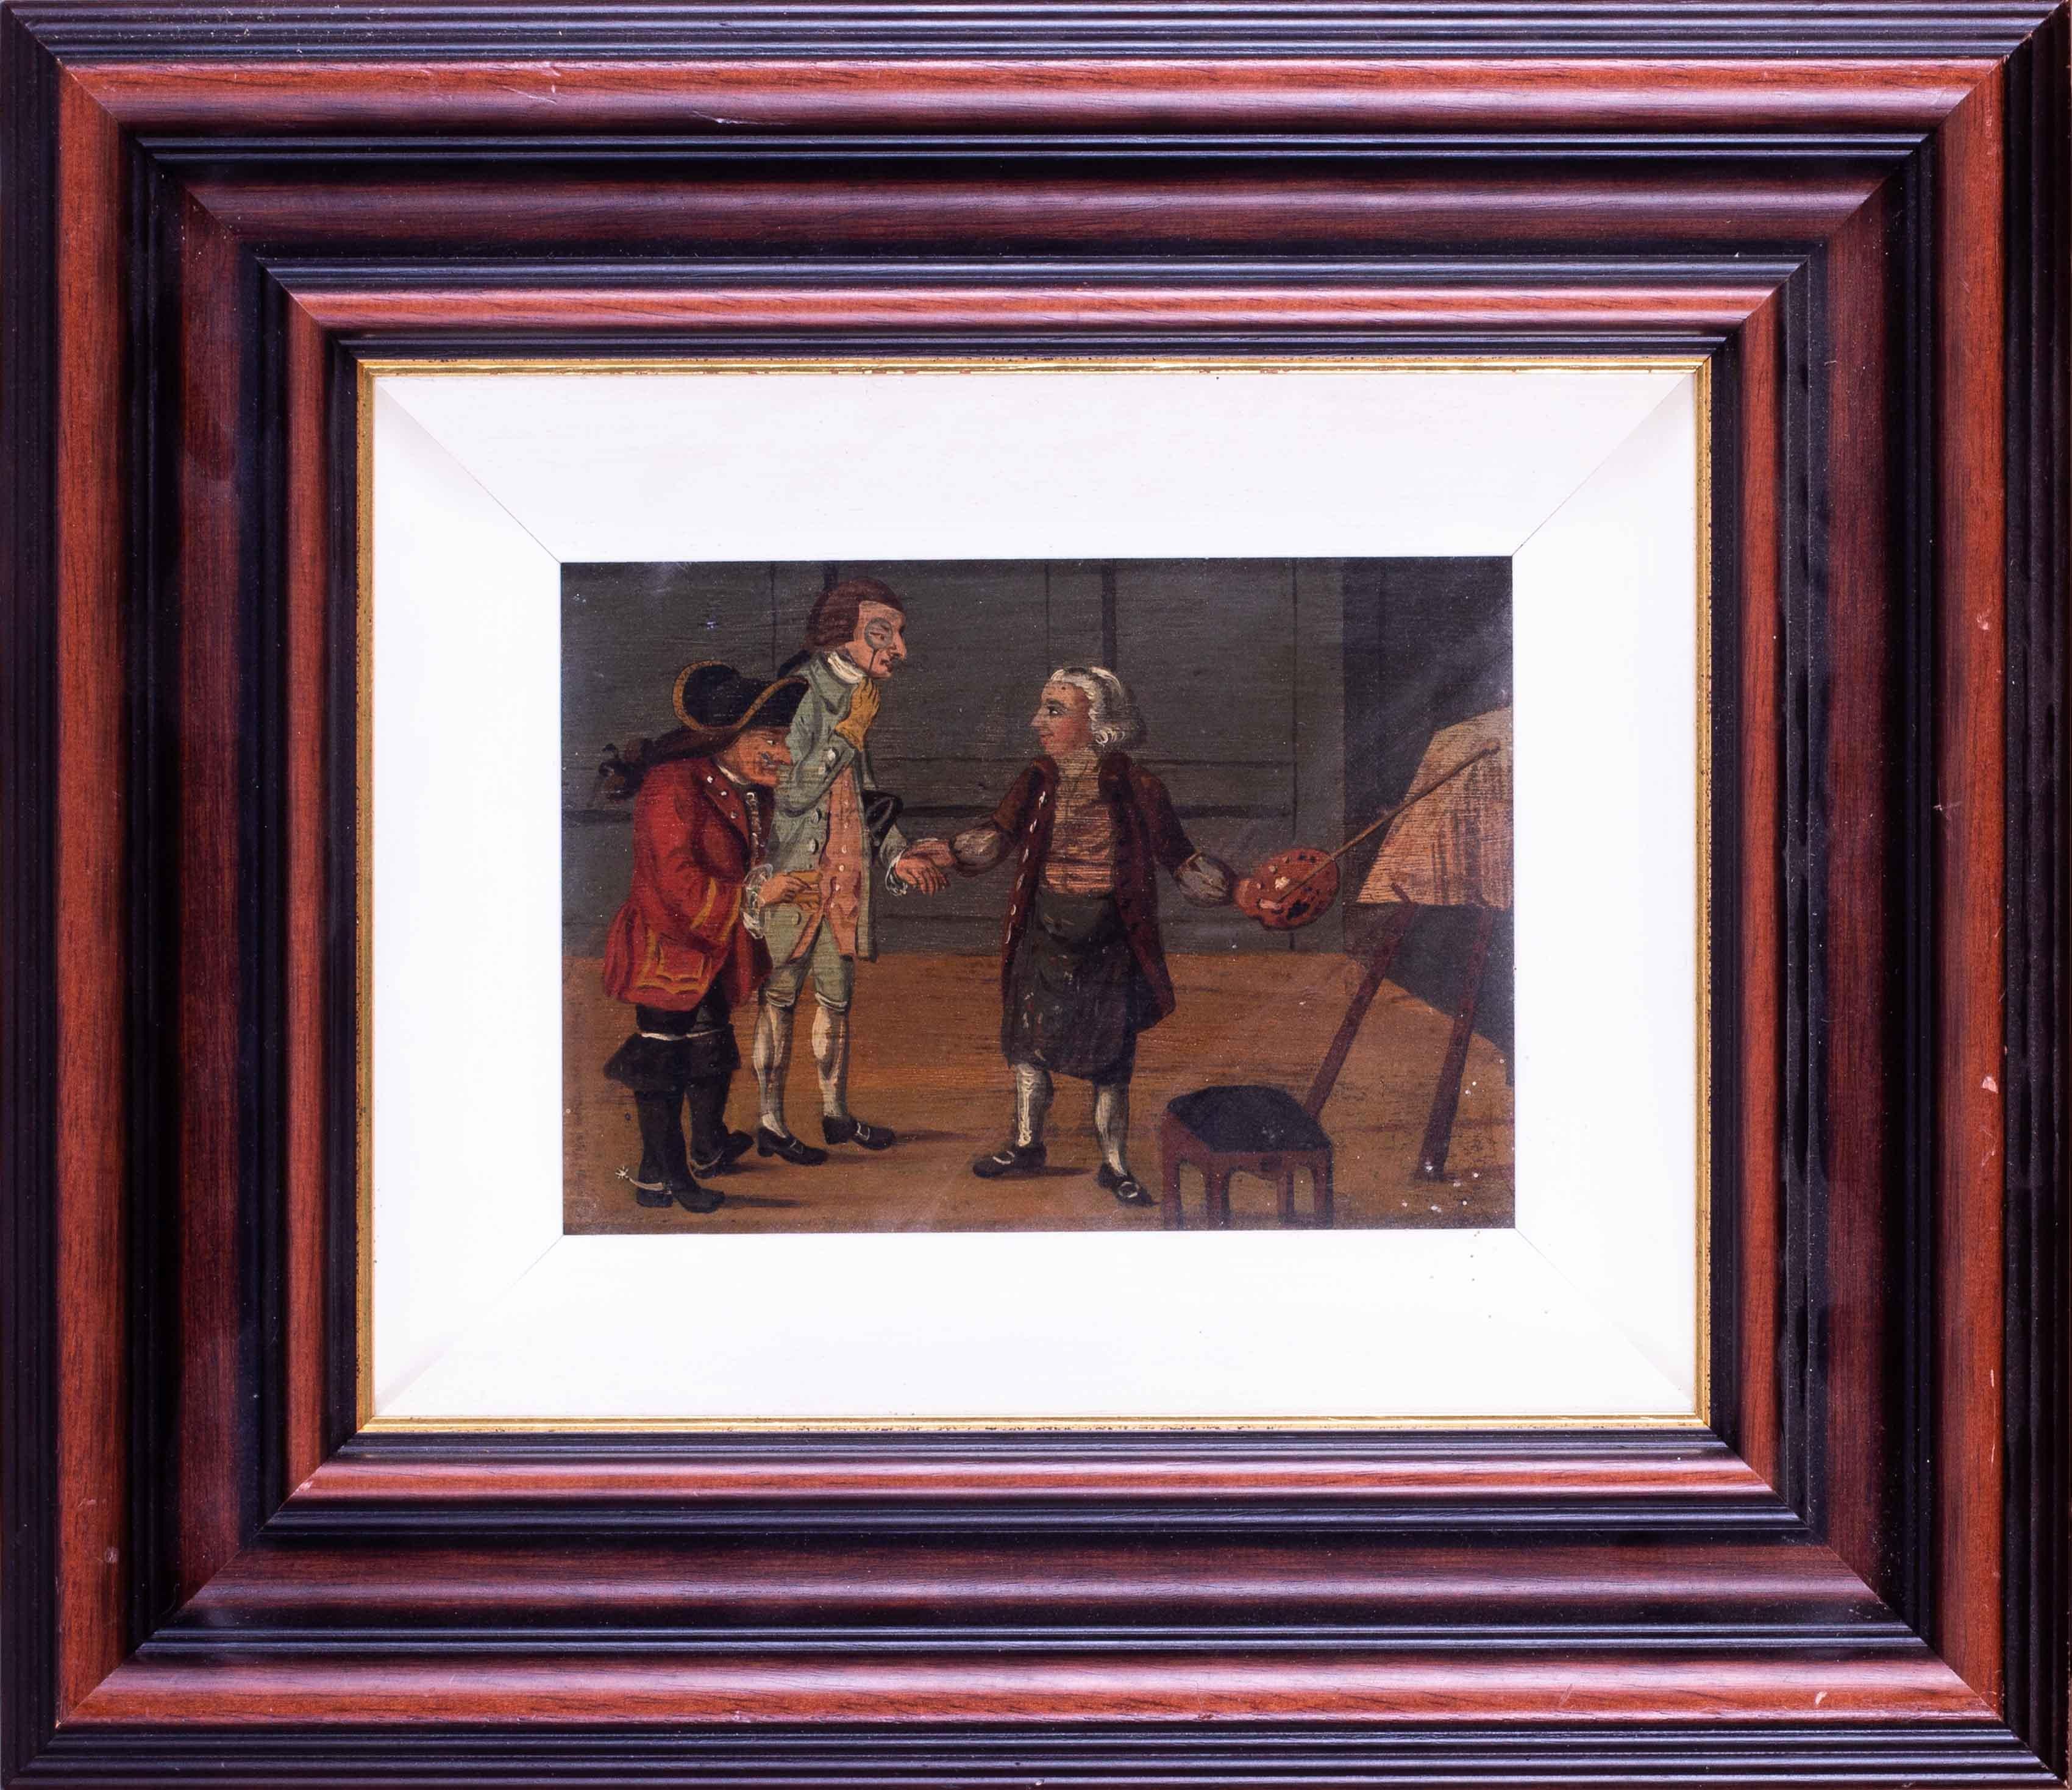 James Gillray Figurative Painting - 18th Century figurative oil painting of connoisseurs studying a painting